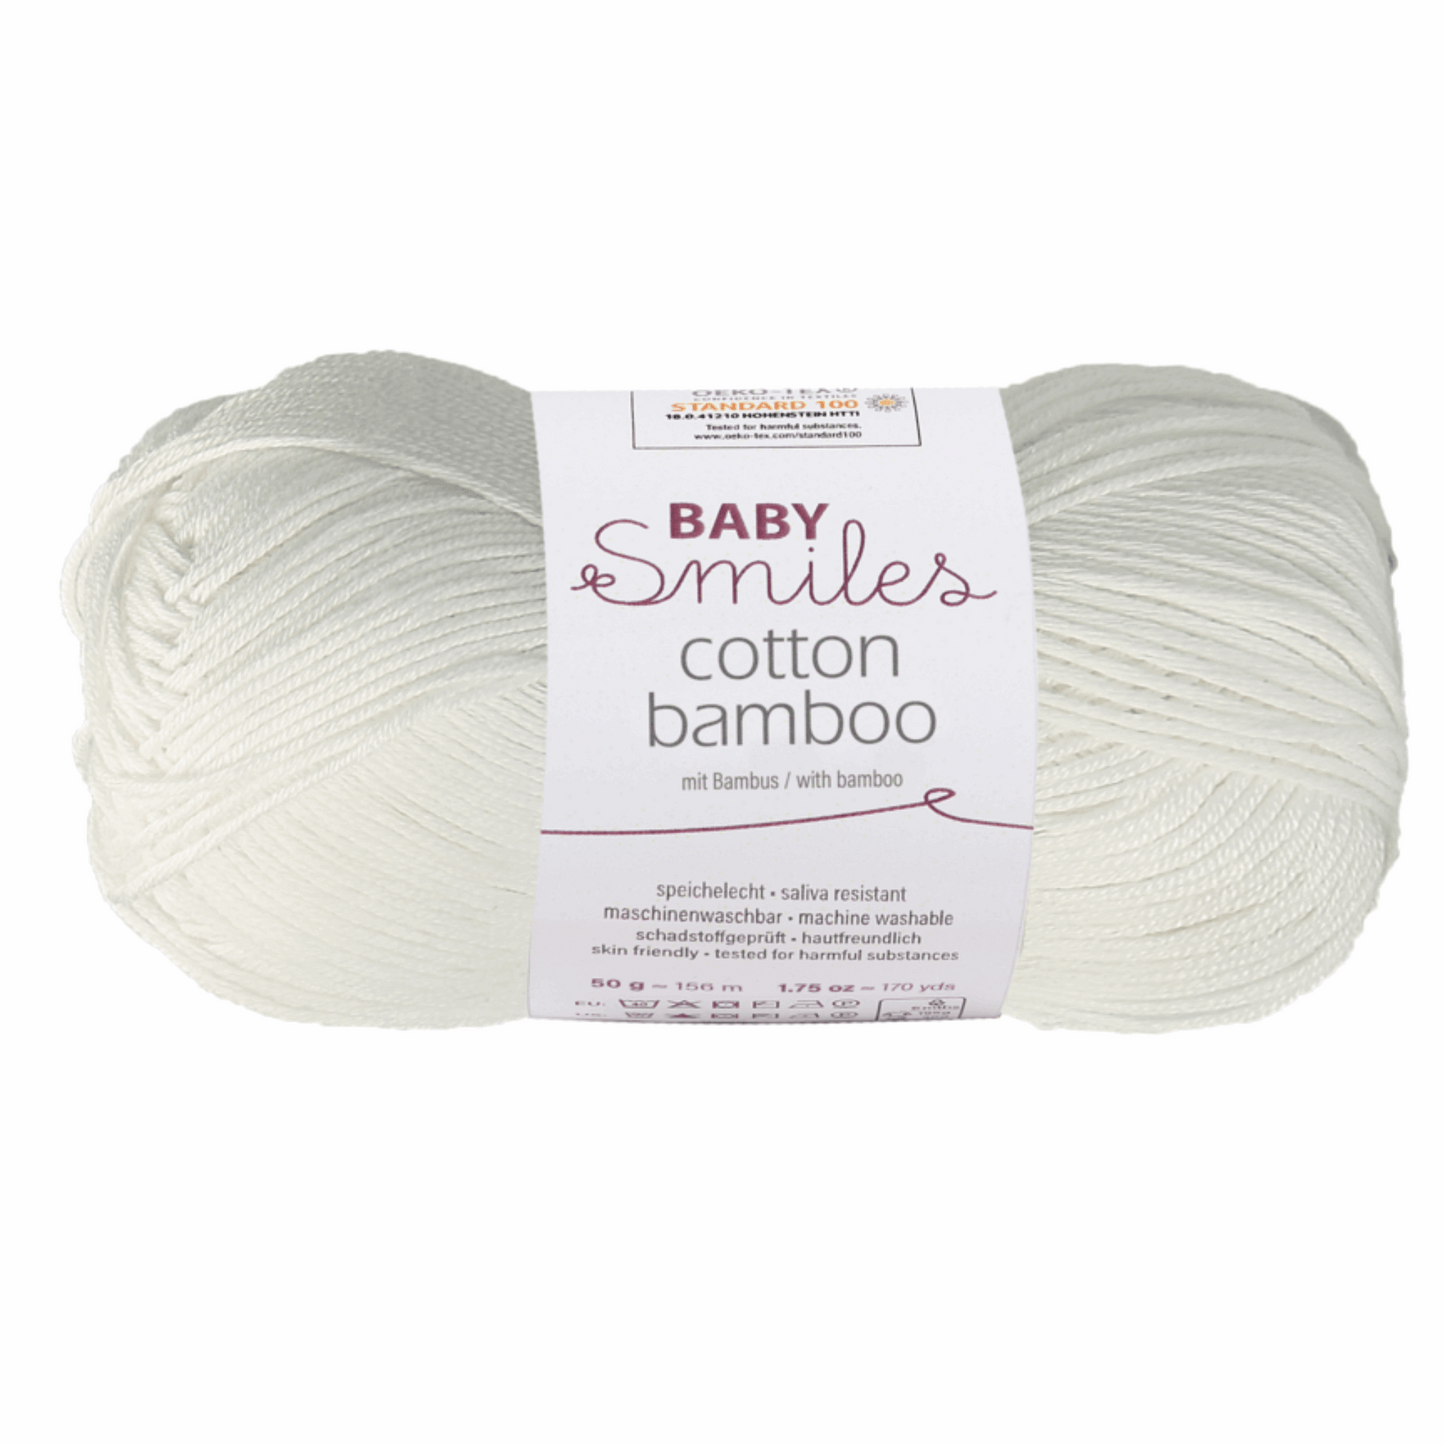 Cotton bamboo-Baby smiles, 90370, Farbe 1001, weiß